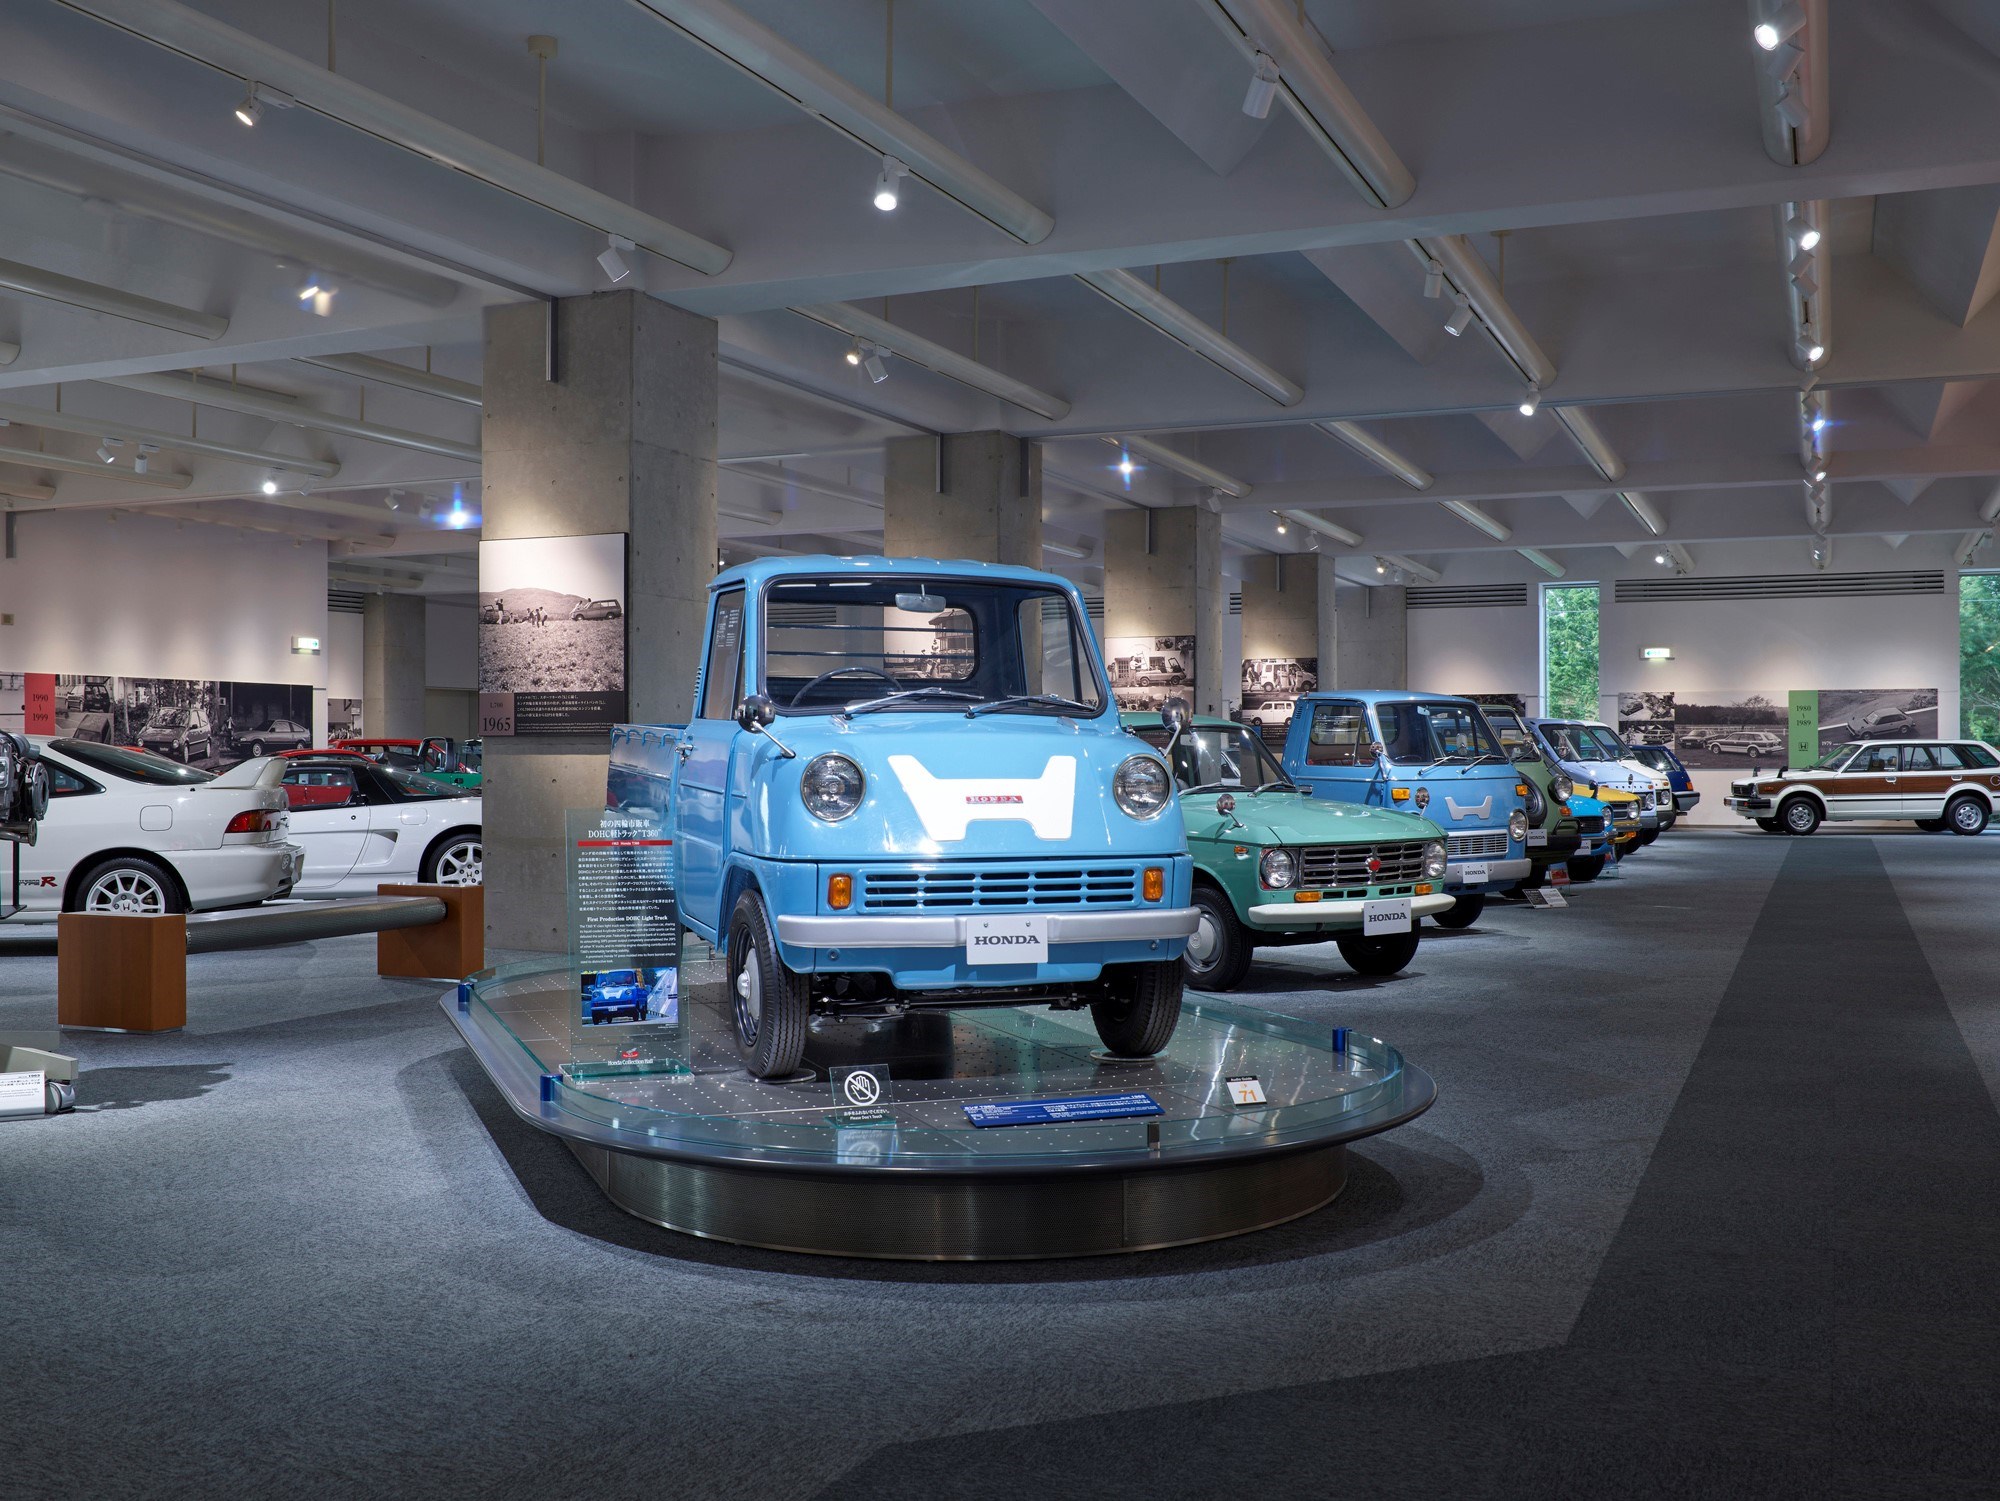 Take a Virtual Tour of the World’s Finest Auto Collections for International Museum Day